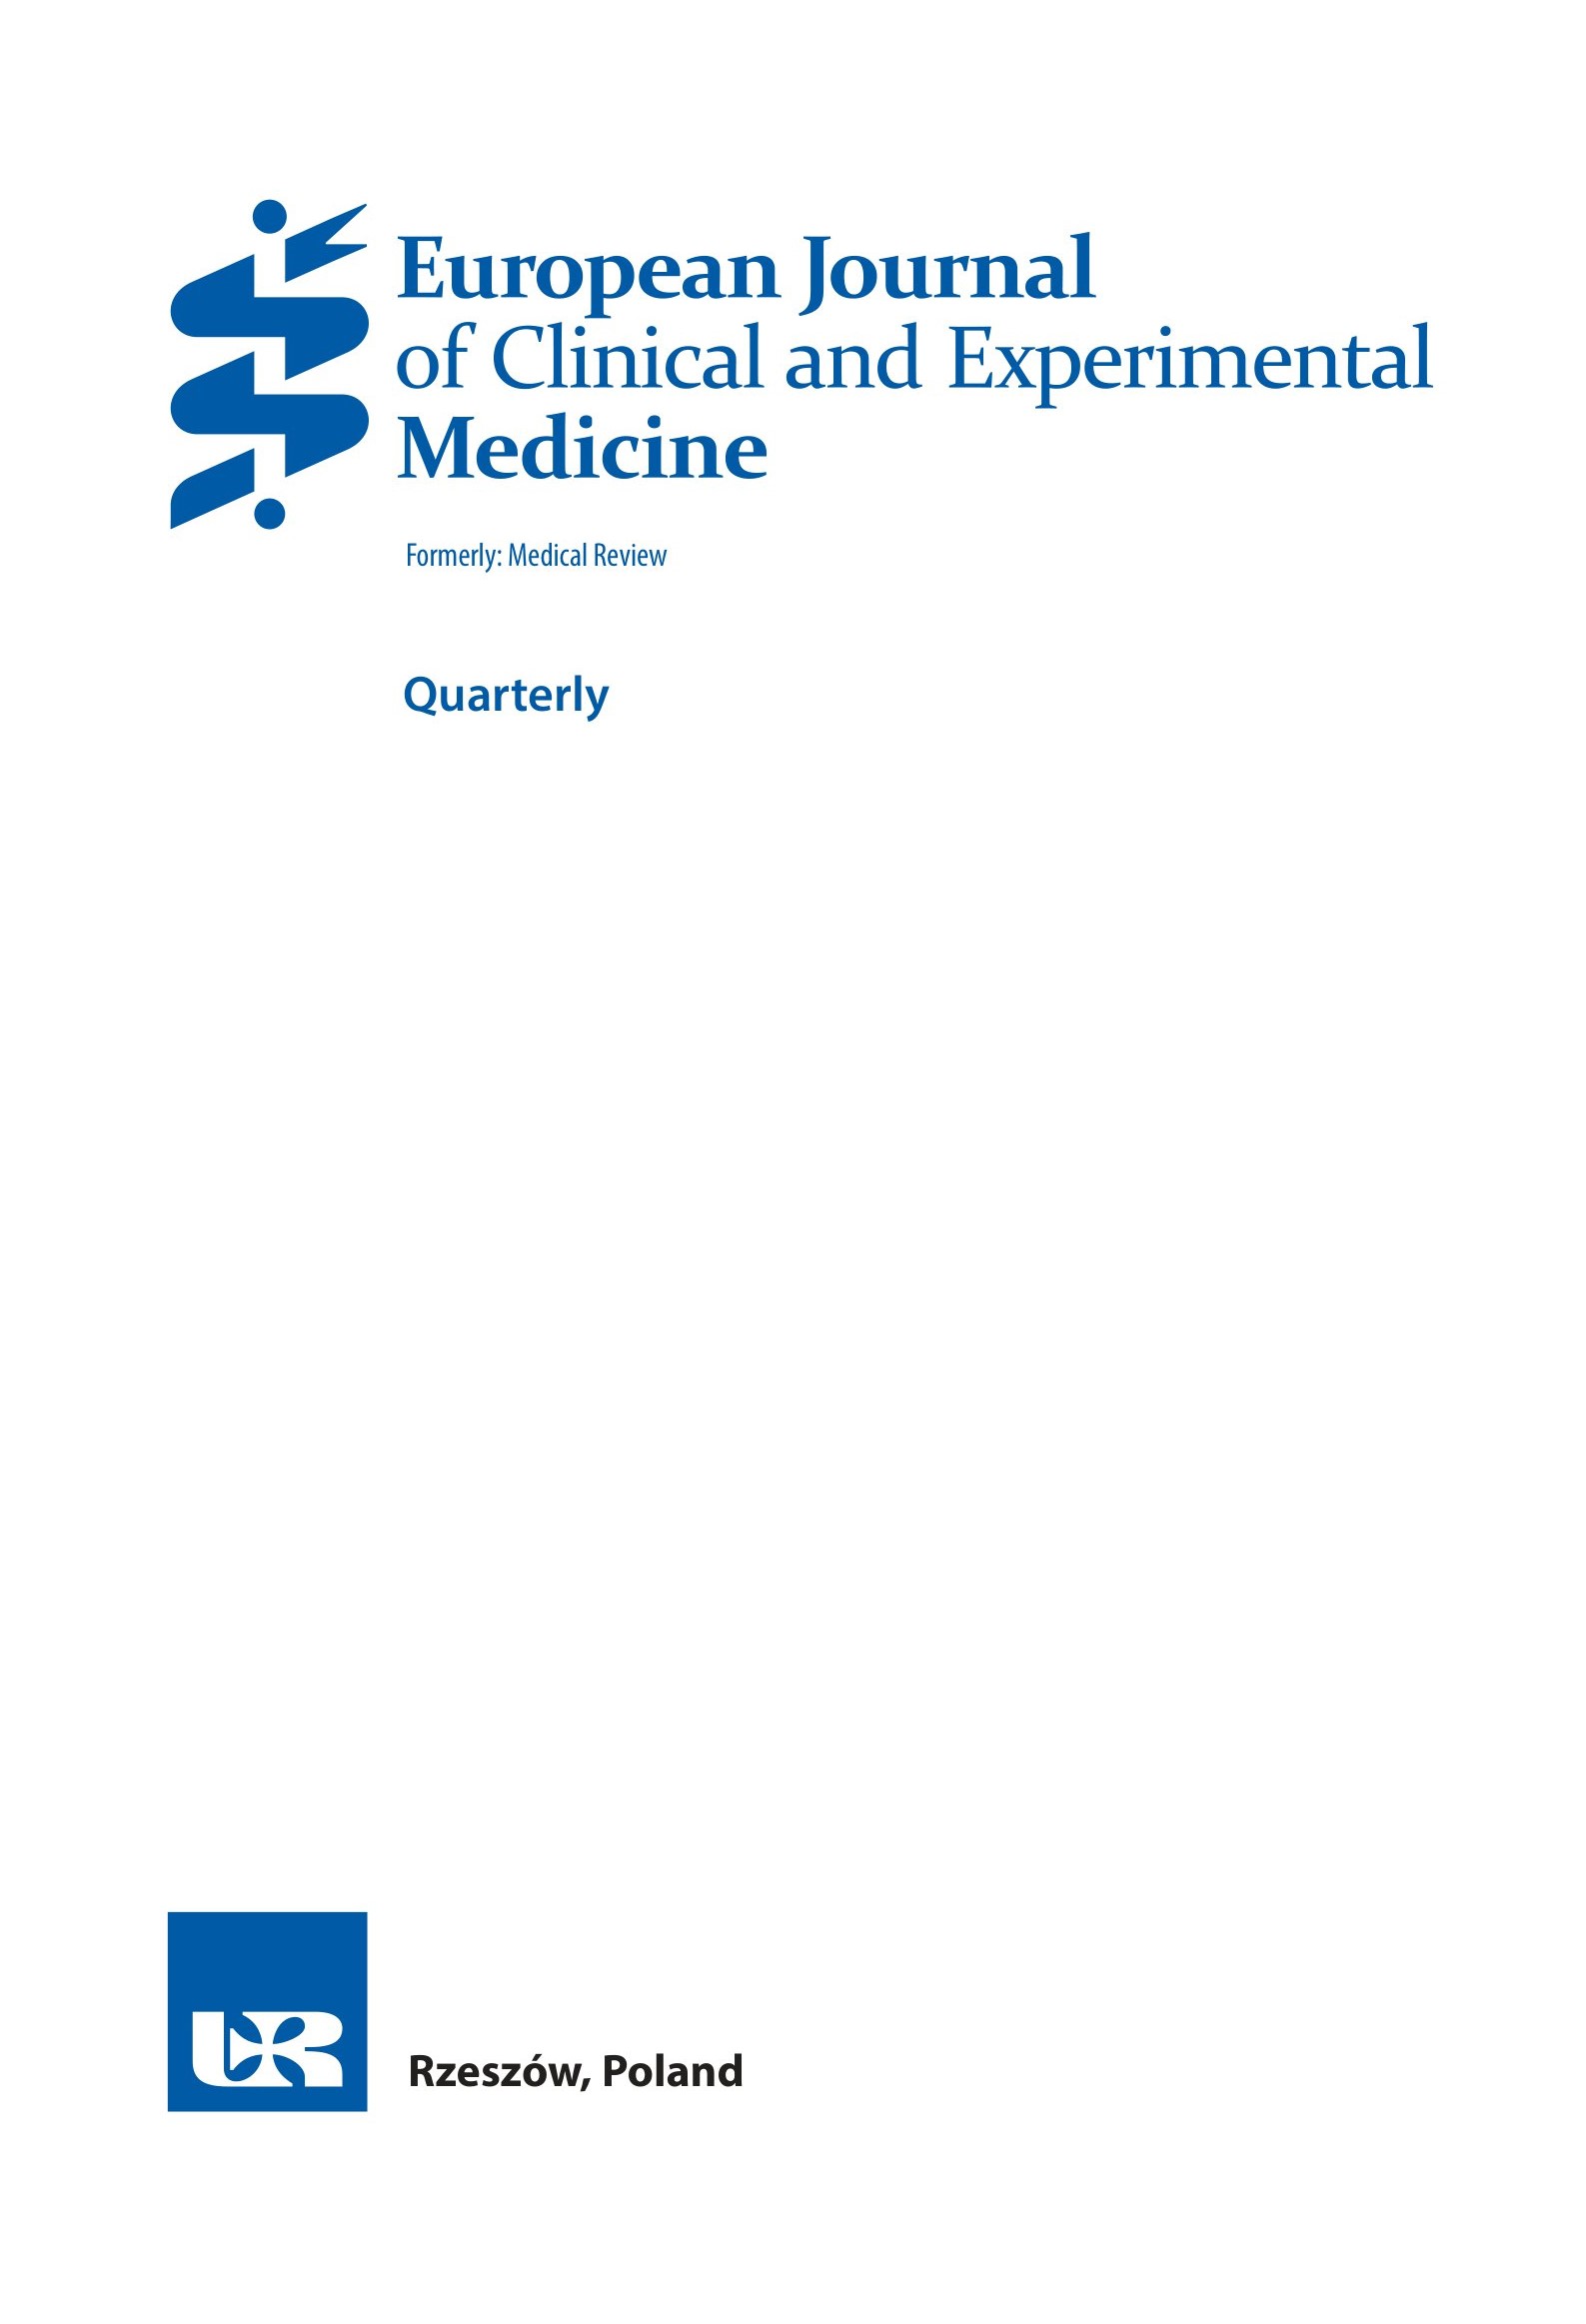 European Journal of Clinical and Experimental Medicine